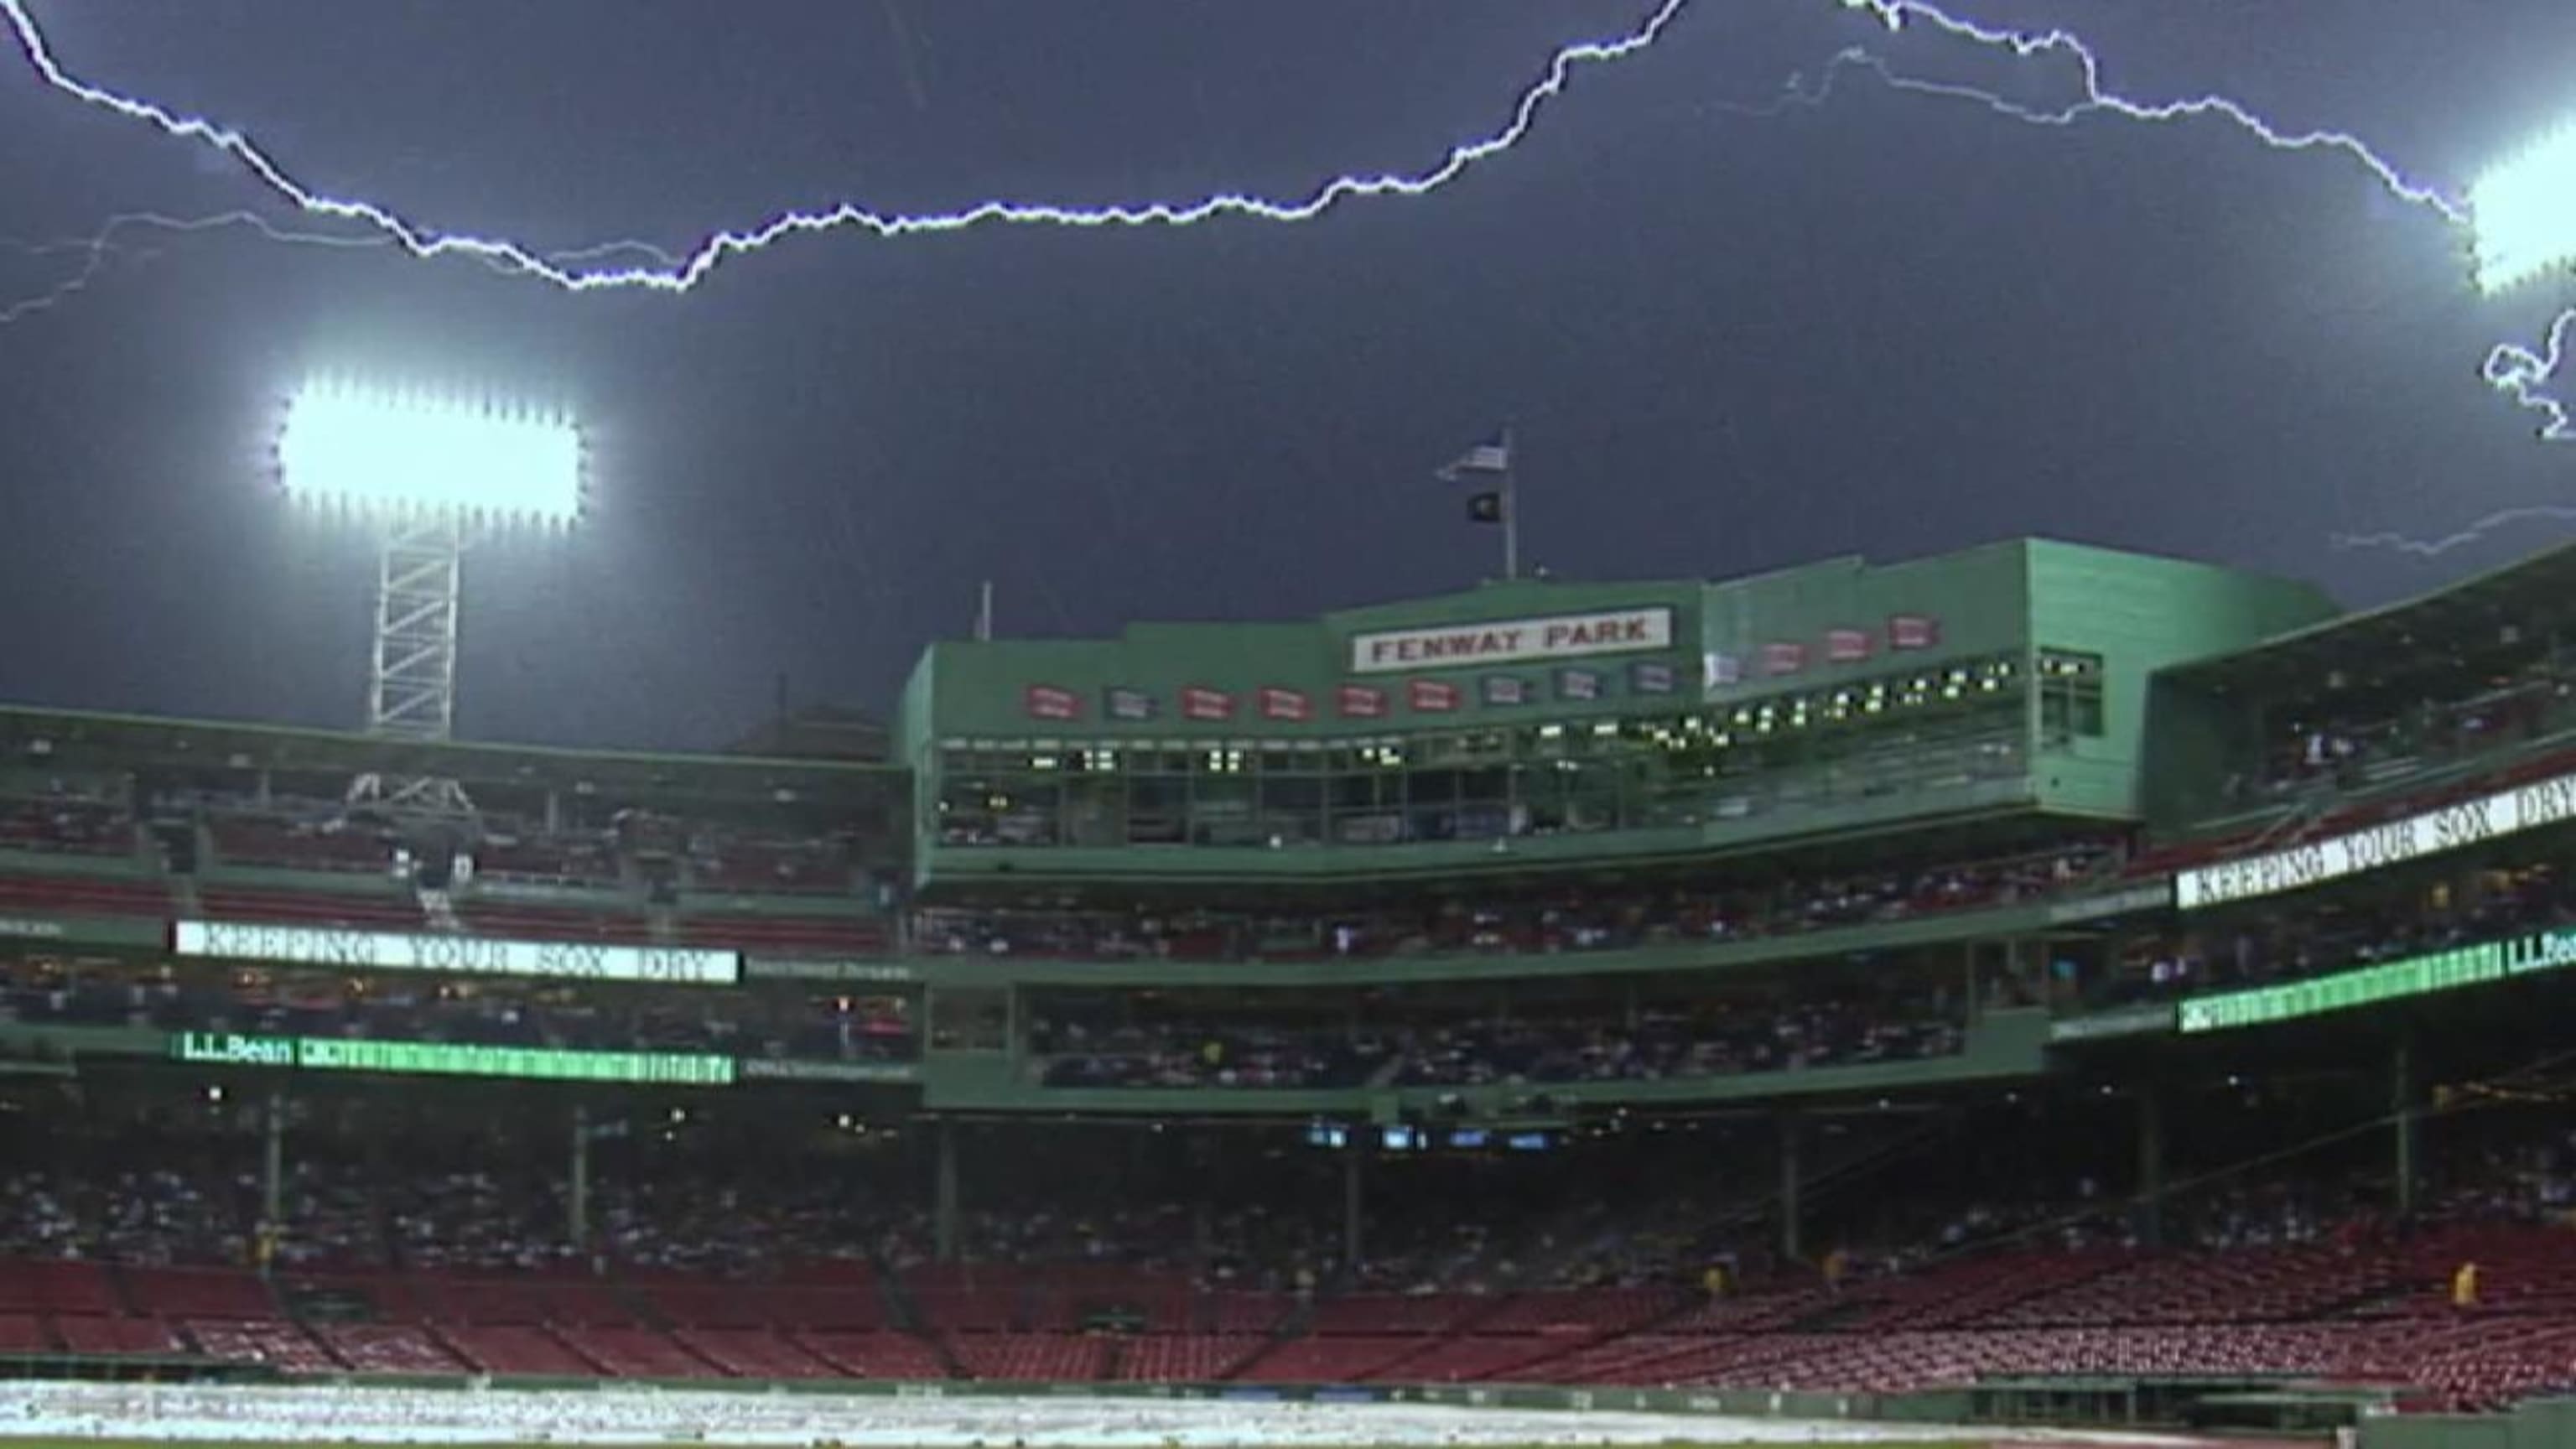 Neither wind, rain delay, nor triple play could derail the Red Sox